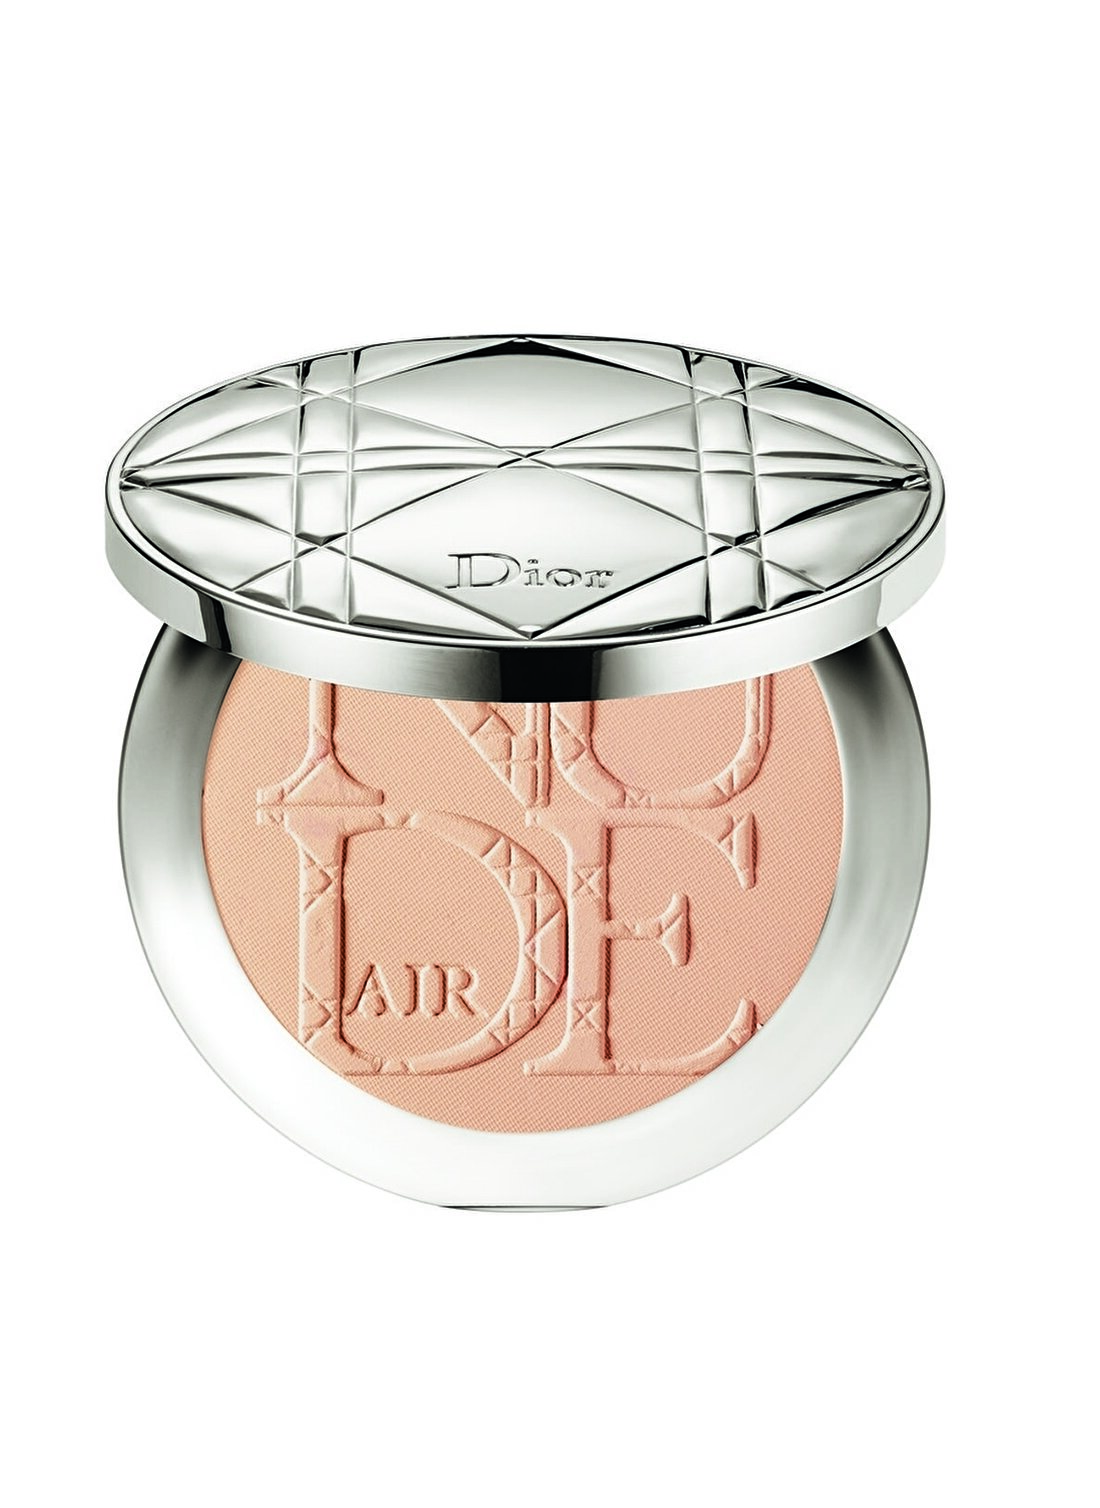 Dior Dreamskin Nude Air Pdr Cpt 020 Pudra